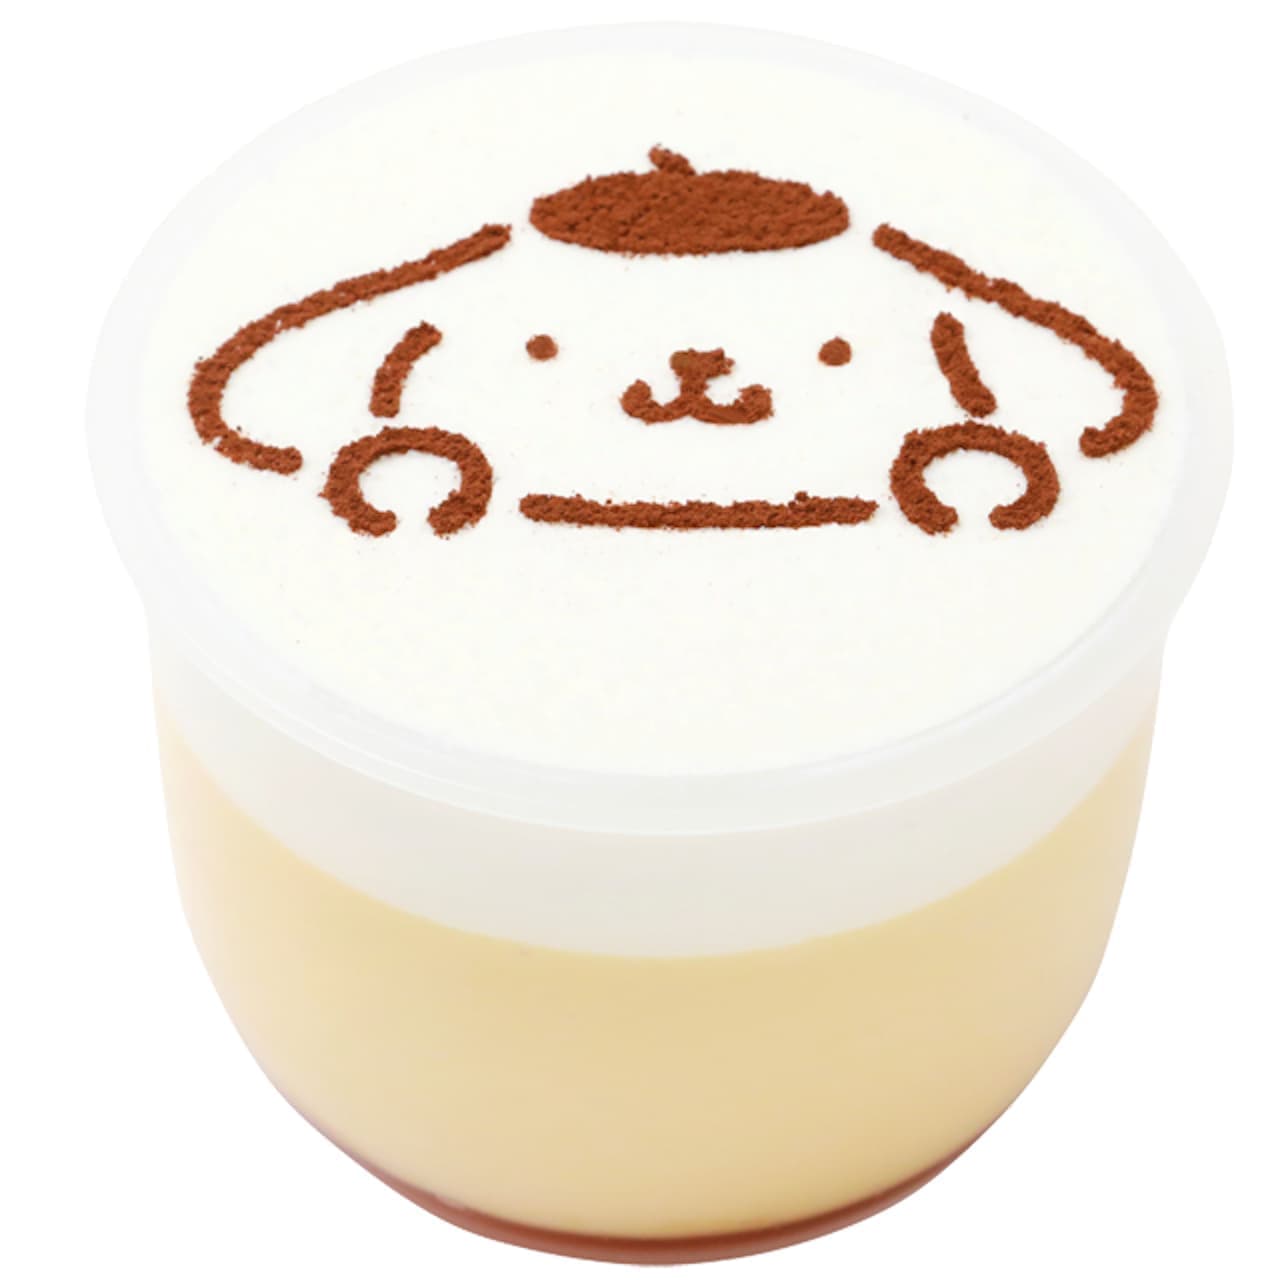 "Smooth pudding" pastel collaborates with "Pompompurin"